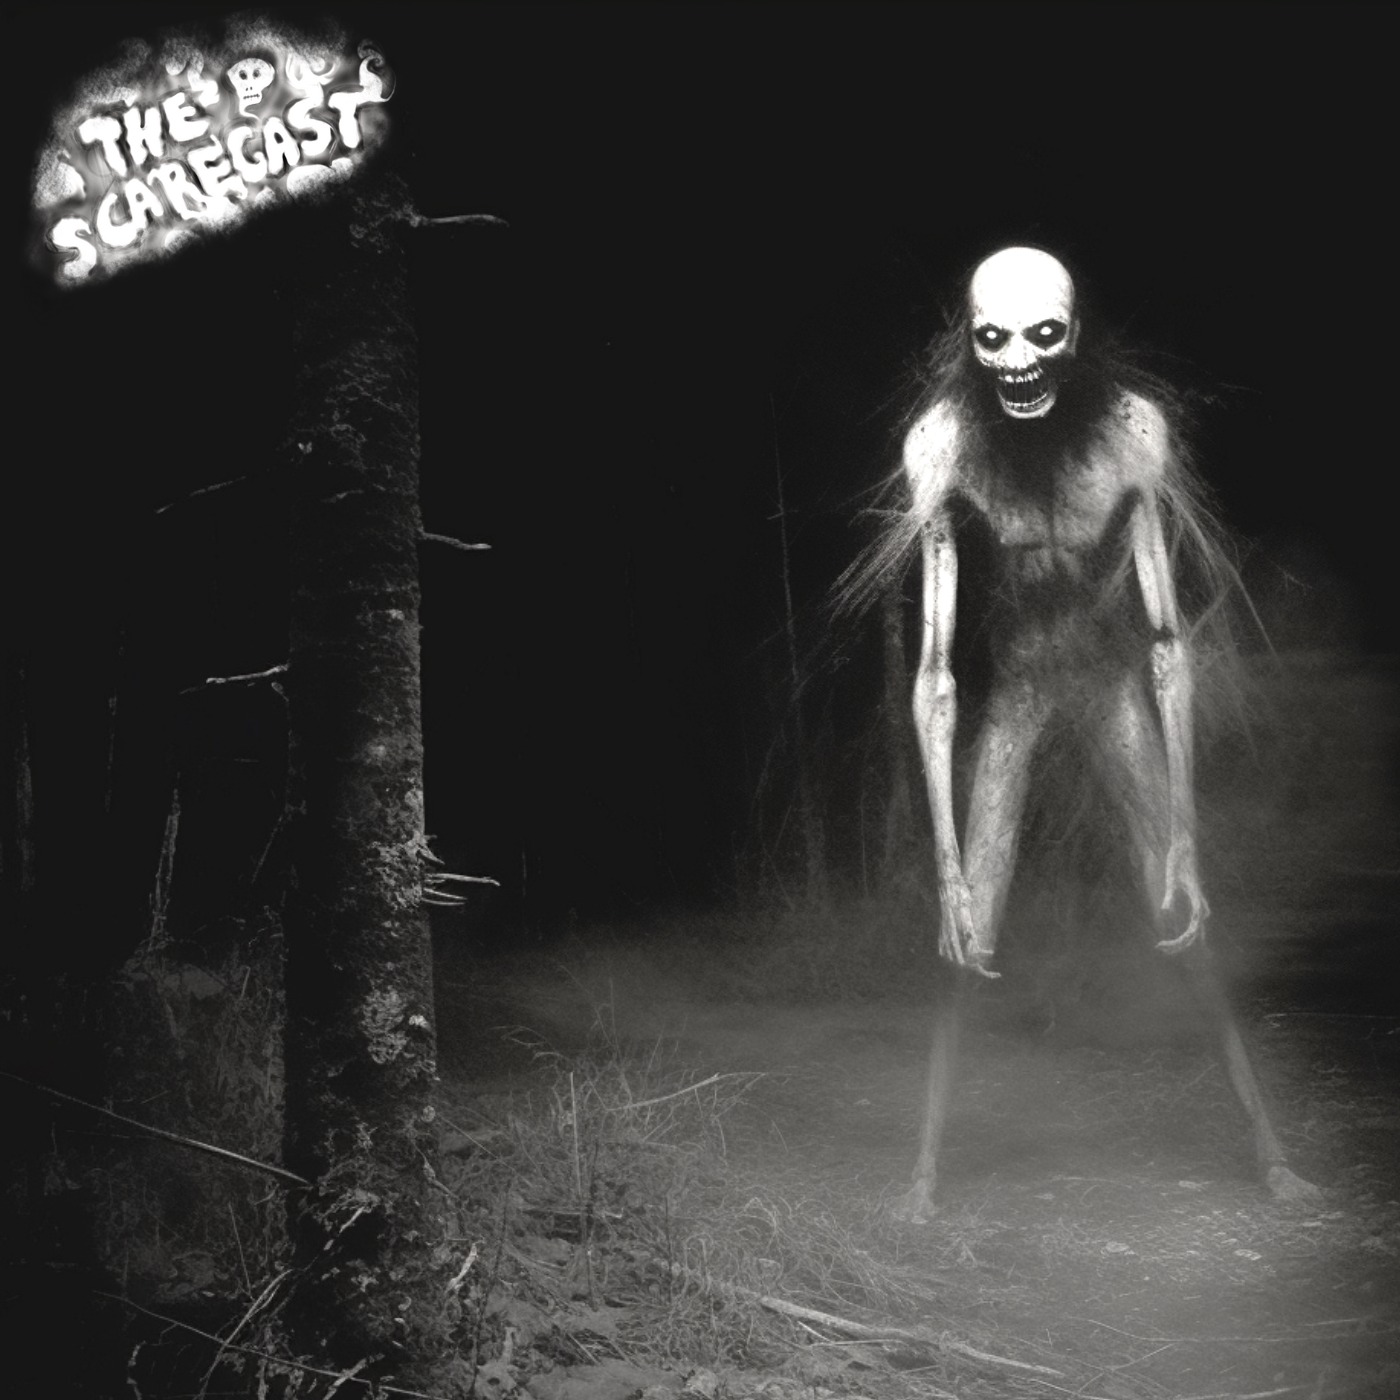 S8E9: 3 TRUE Scary Stories (AOL Instant Messenger, Weird Encounter in The Woods, and Creepy Neighbor)